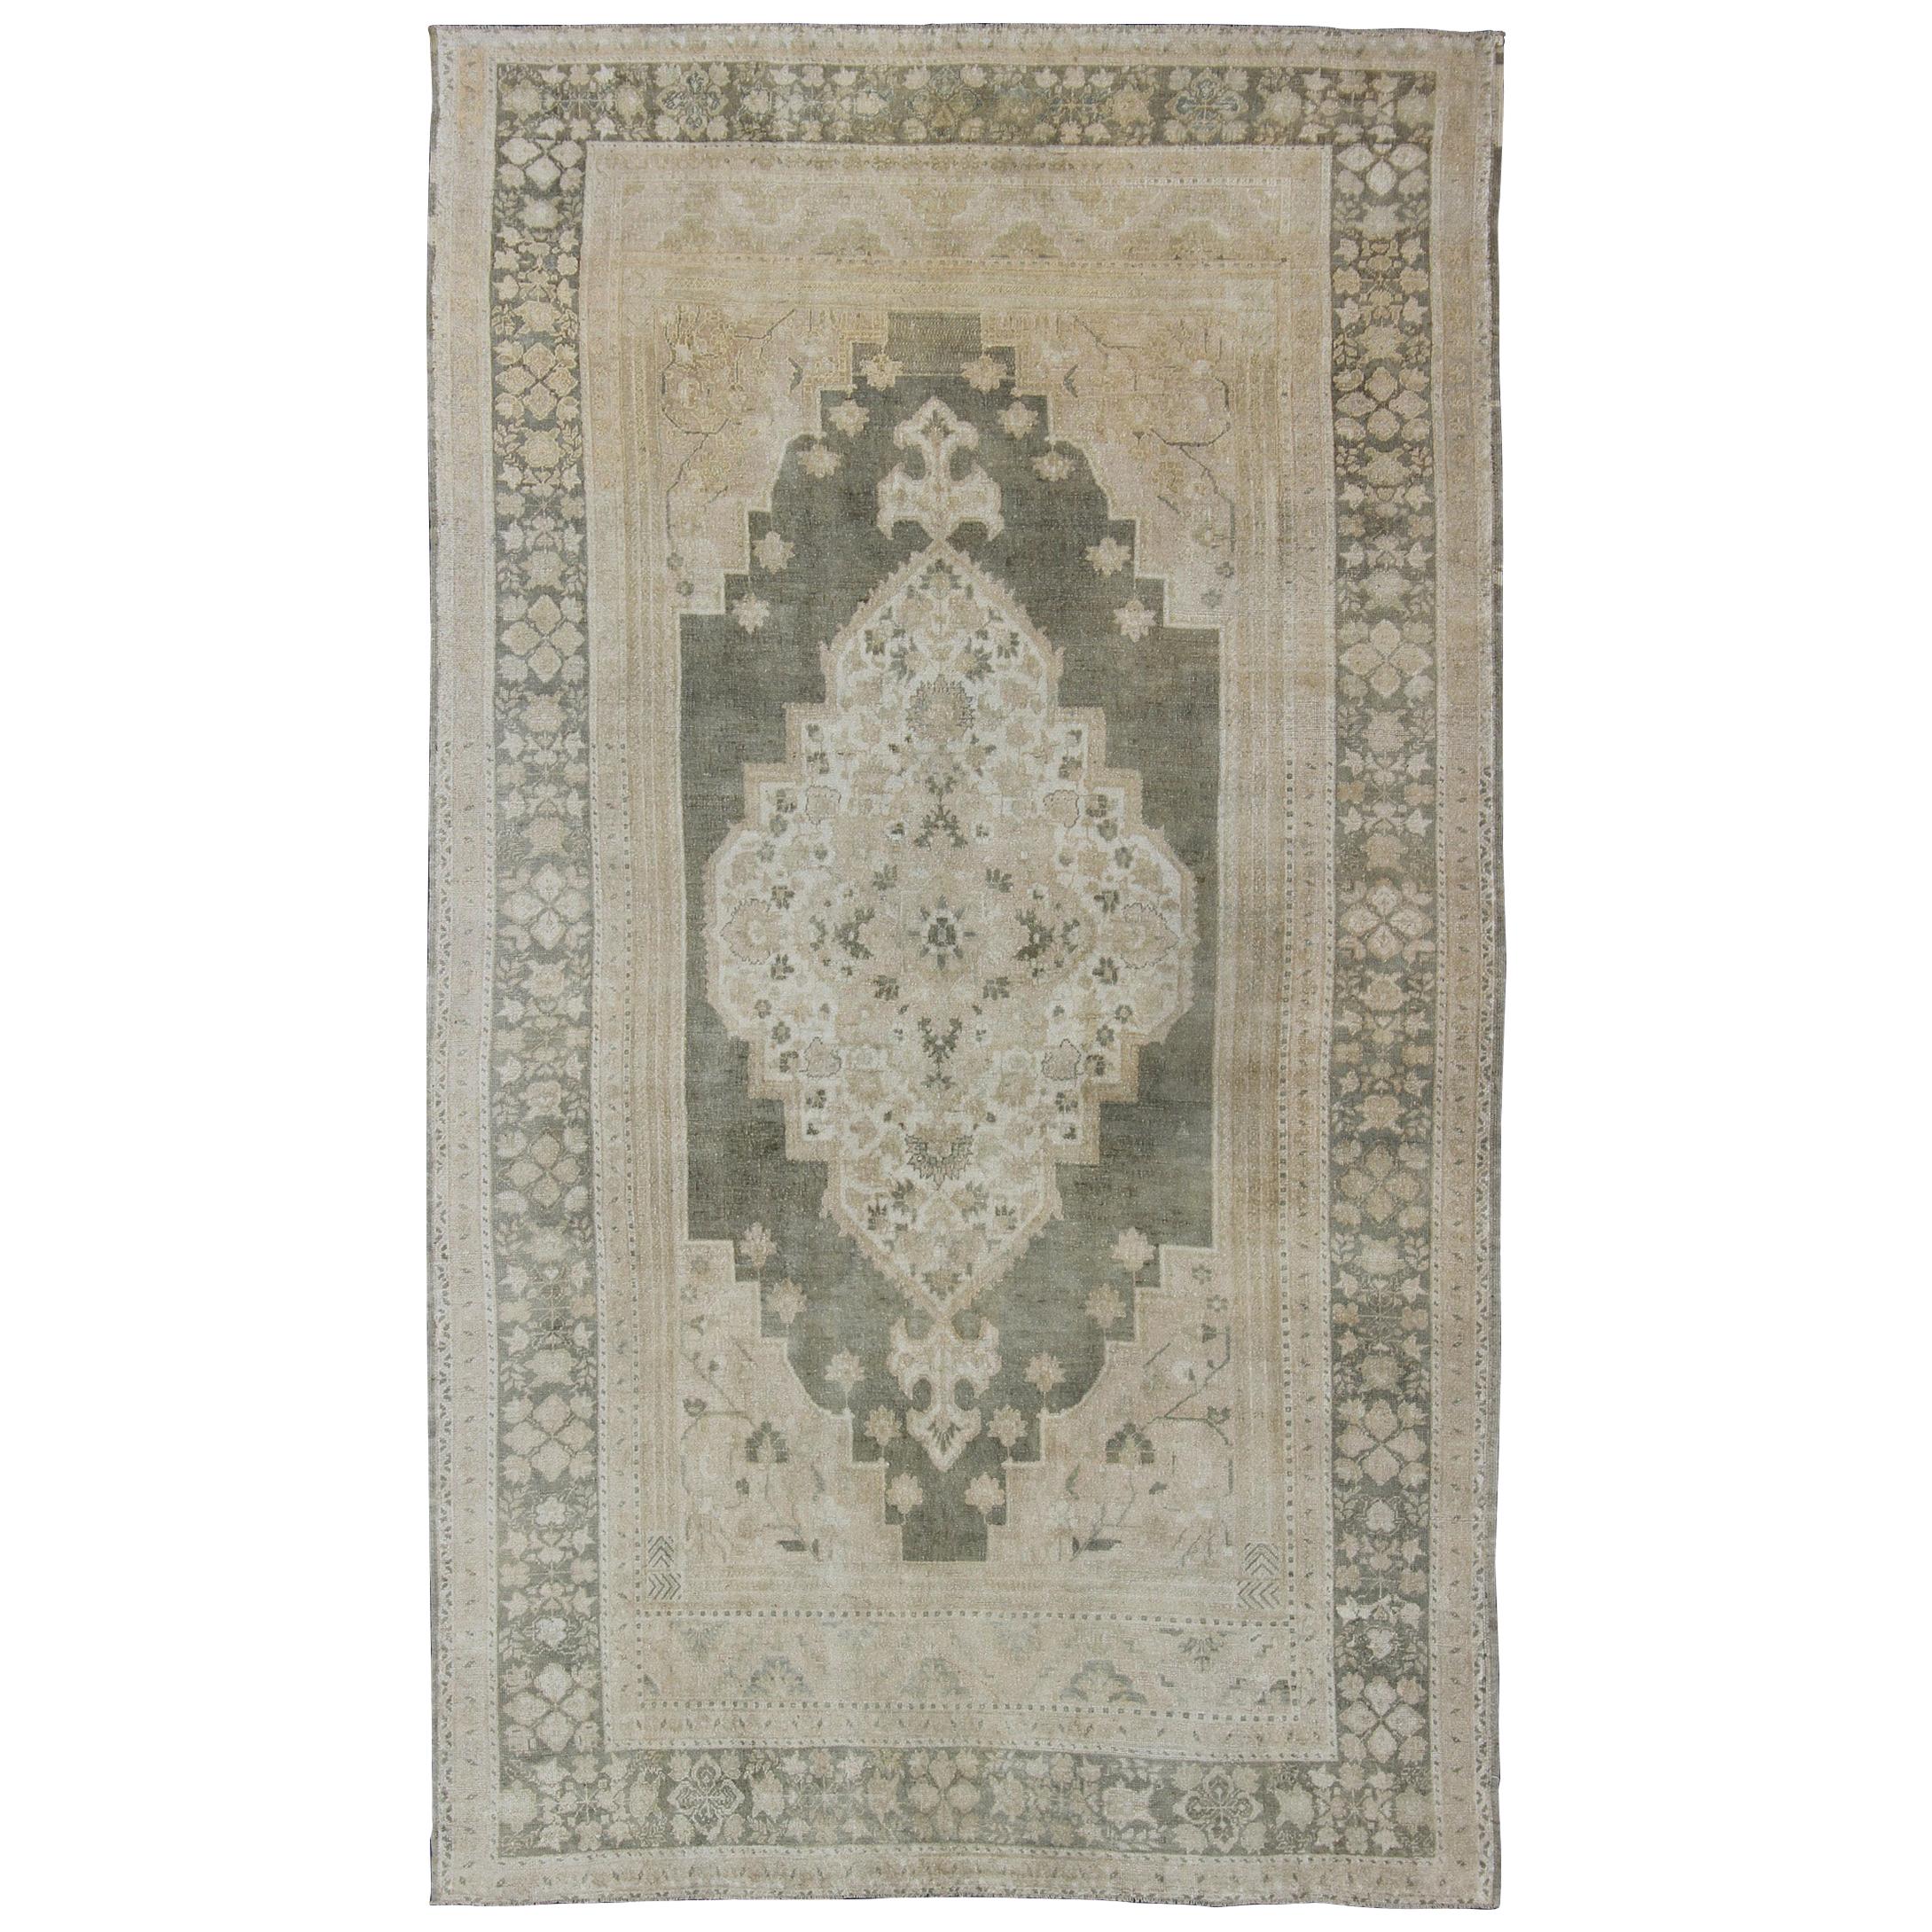 Muted Turkish Large Oushak with Medallion in Olive Green, Tan & Neutrals